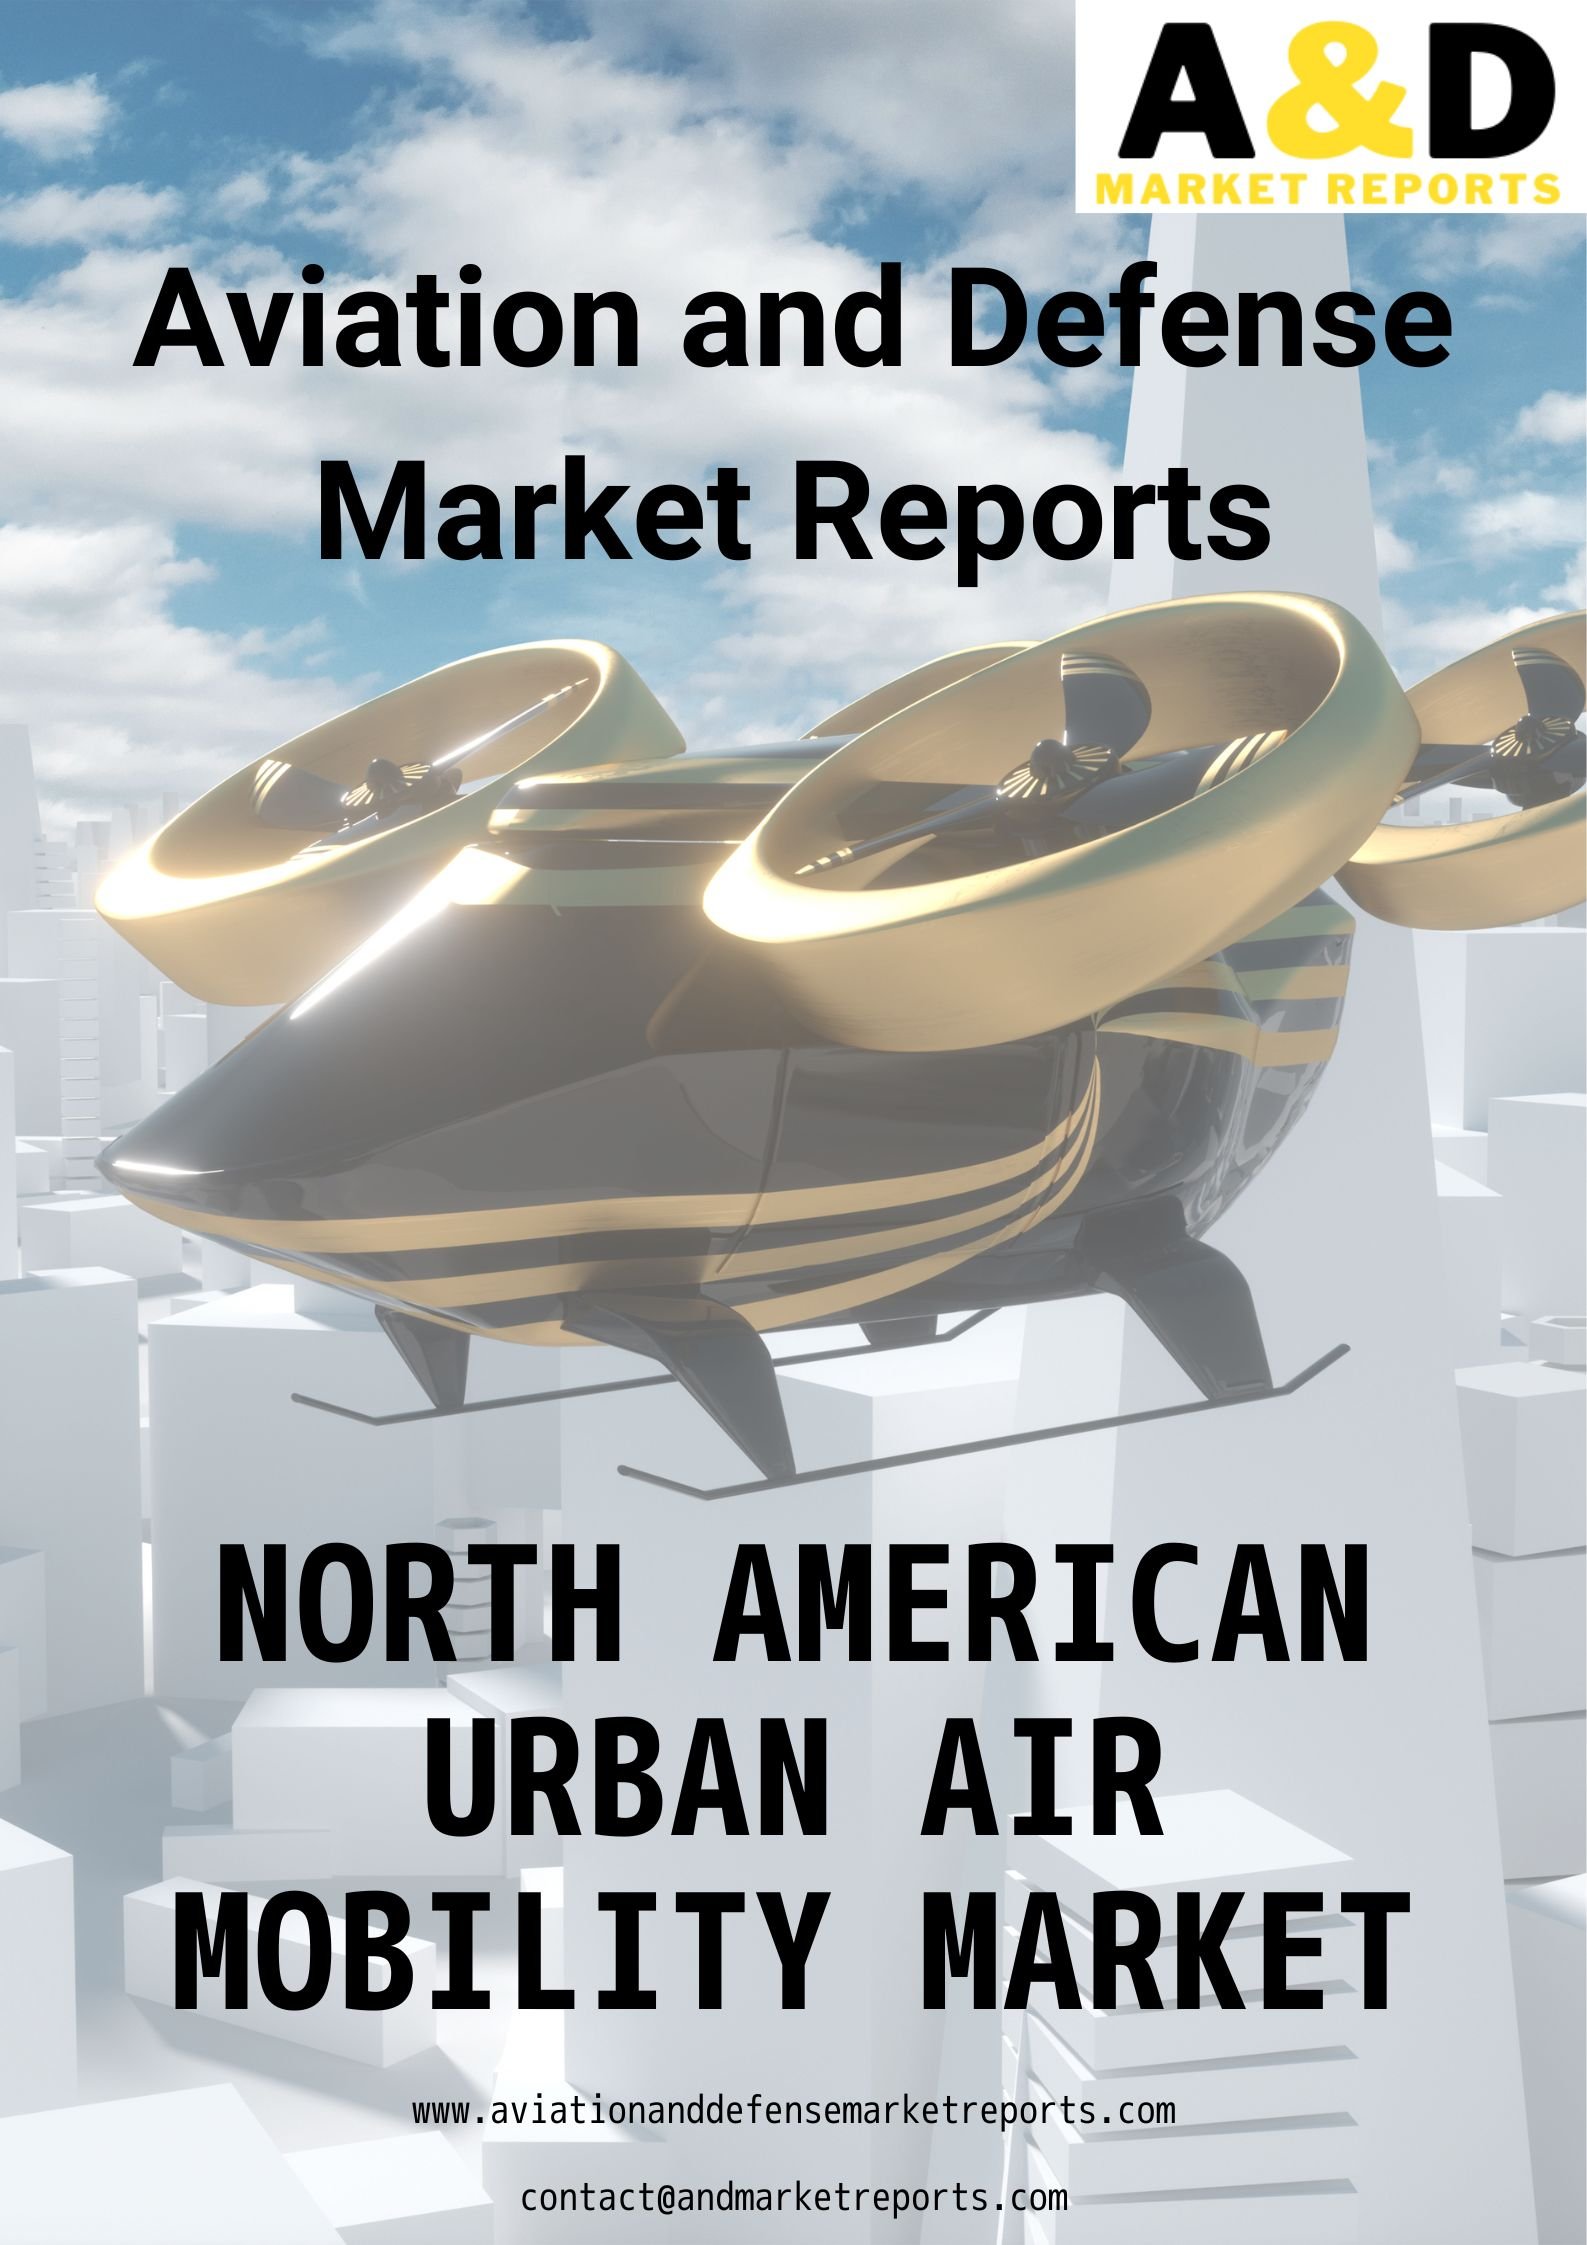 Is North America Ahead of the Curve in UAM Market?